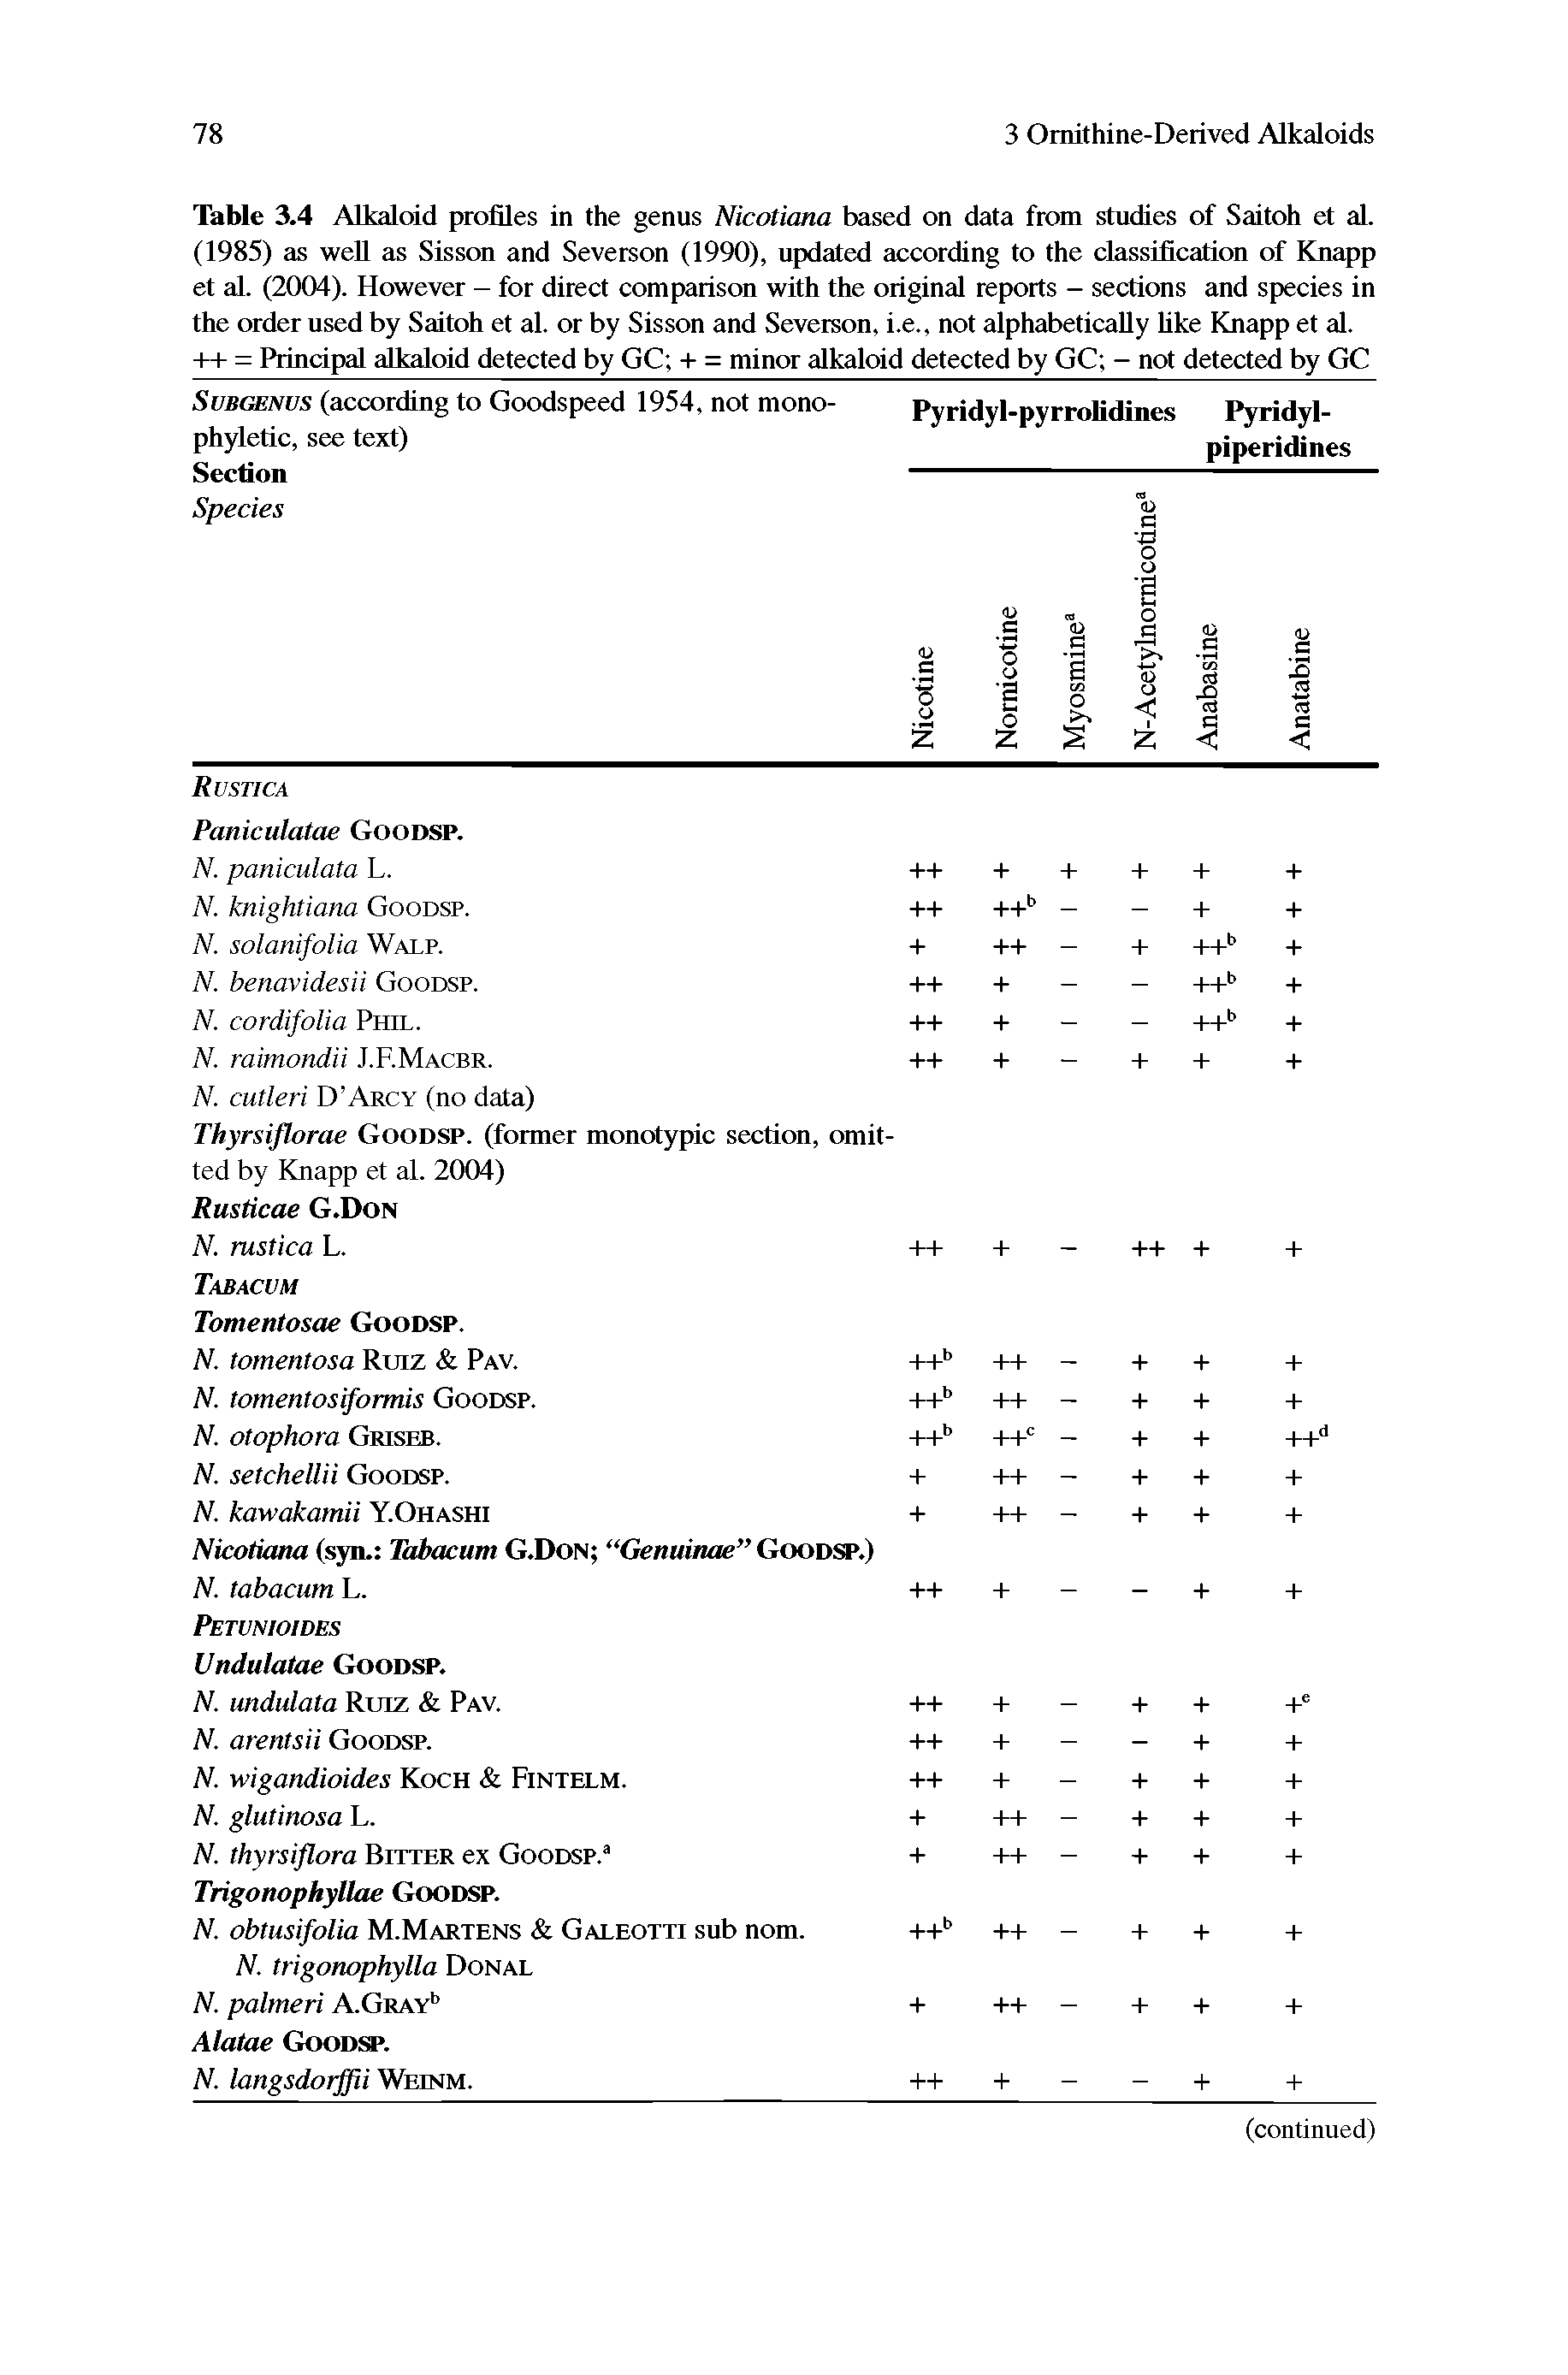 Table 3.4 Alkaloid profiles in the genus Nicotiana based on data from studies of Saitoh et aL (1985) as wen as Sisson and Severson (1990), updated according to the classification of Knapp et aL (2004). However - for direct compeuison with the original reports - sections and species in the order used by Saitoh et til. or by Sisson and Severson, i.e., not alphabetictilly like Knapp et al. ++ = Principal alkaloid detected by GC + = minor alkaloid detected by GC - not detected by GC...